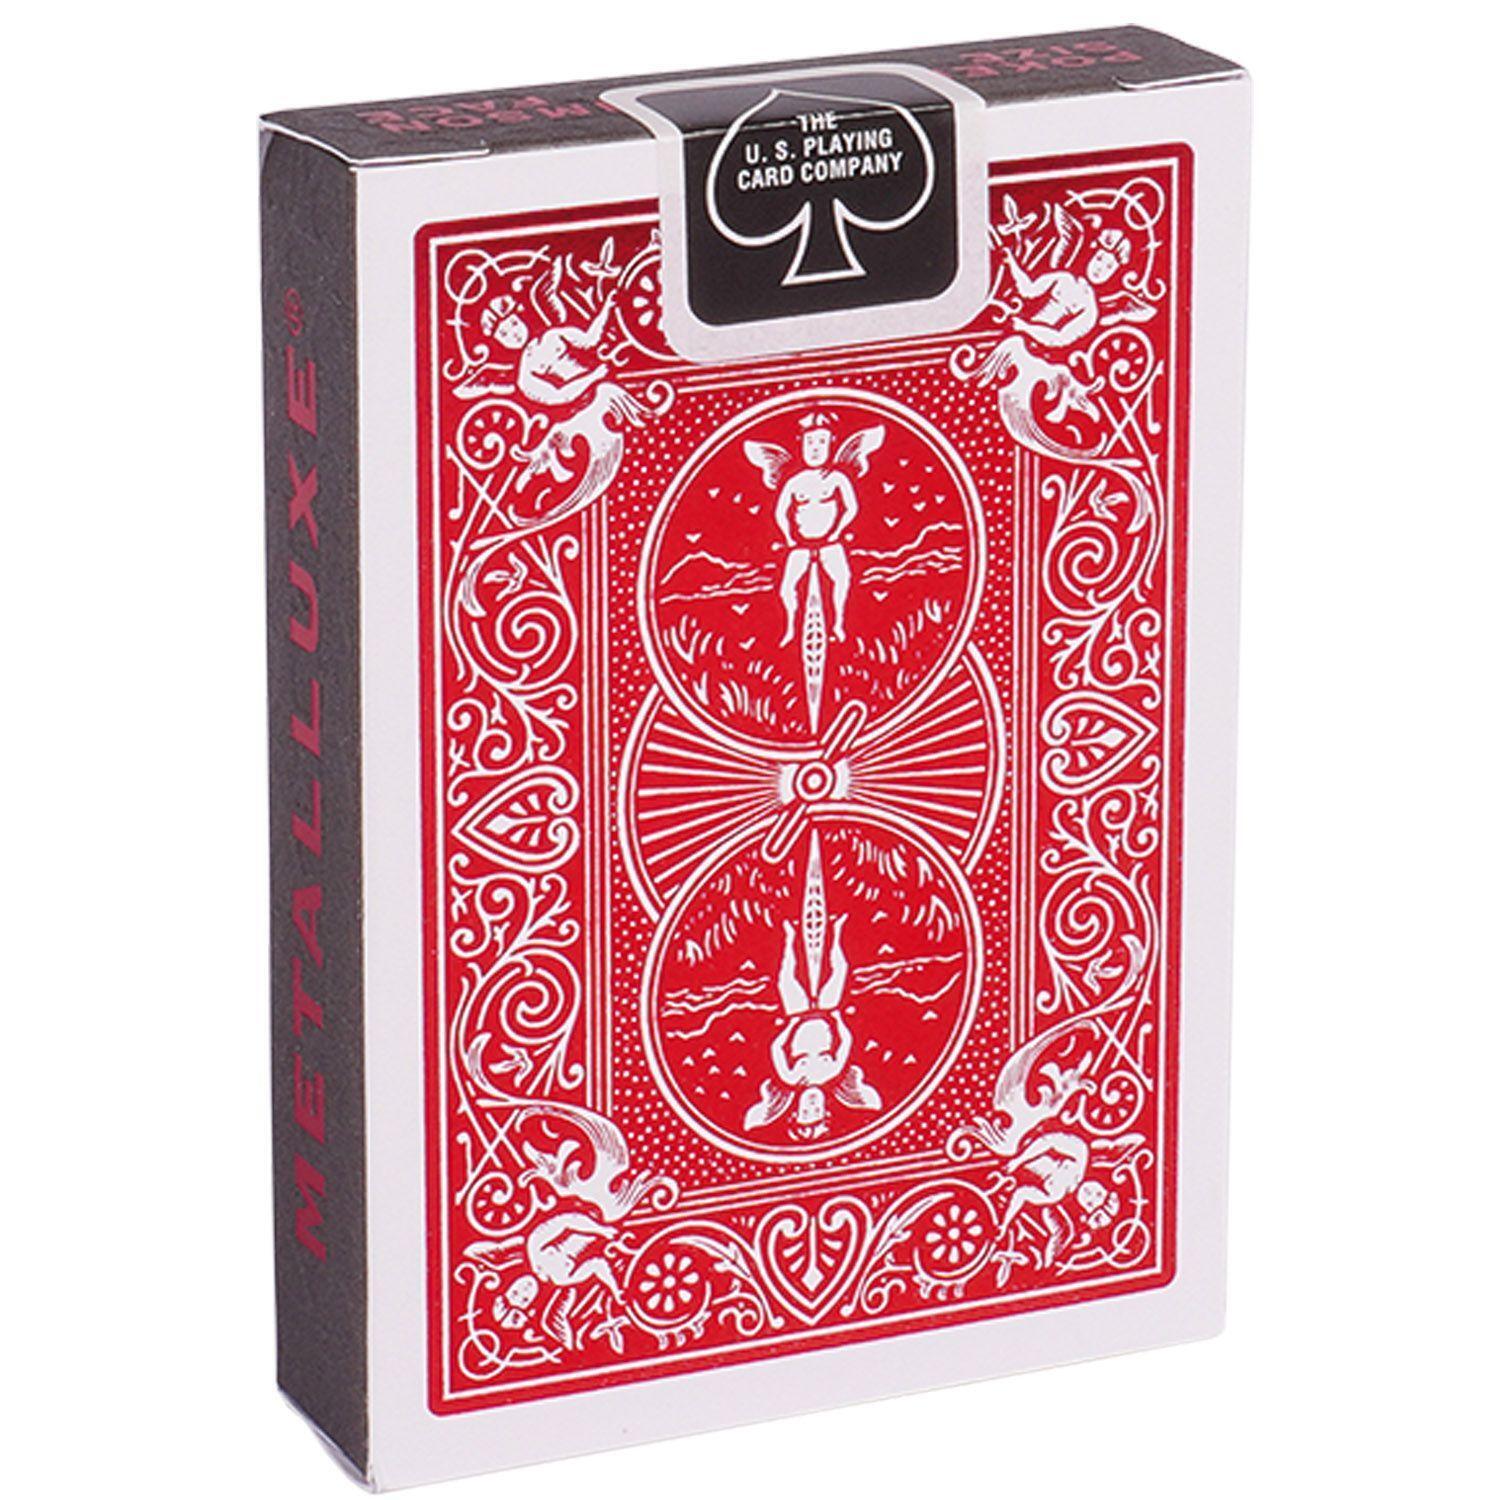 Bild: 73854024409 | Bicycle Mettaluxe Red | United States Playing Card Company | Spiel